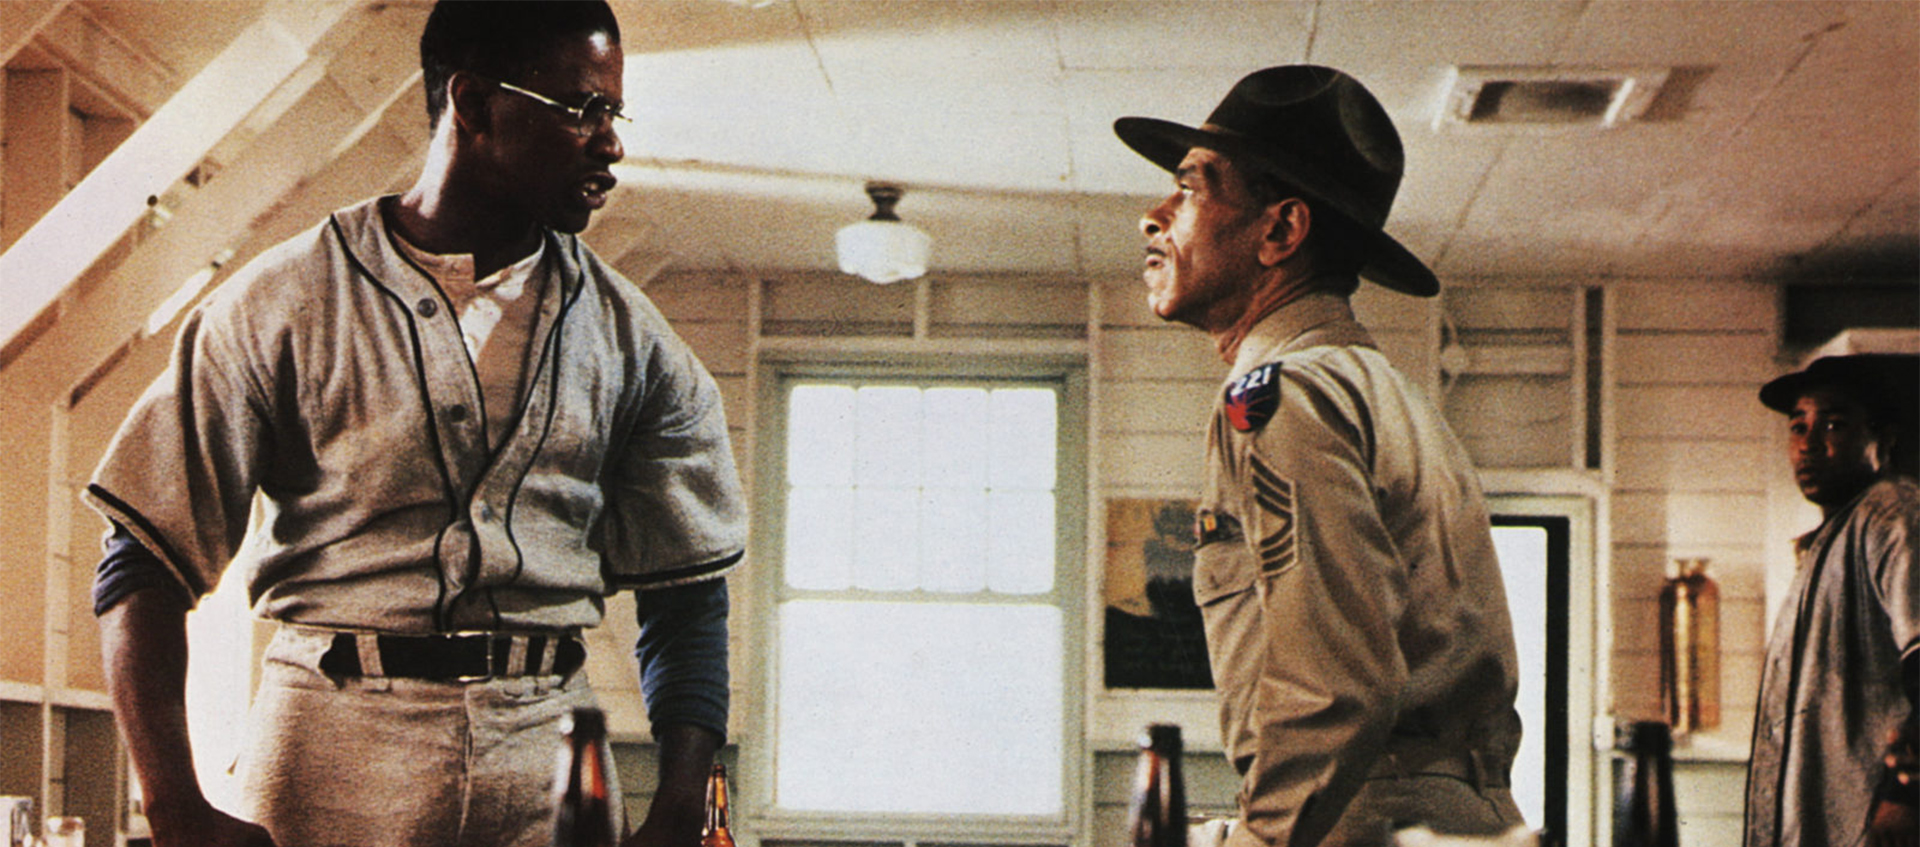 Denzel Washington in jeans and gray shirt, wearing eyeglasses stands in front of a military officer and is telling at him